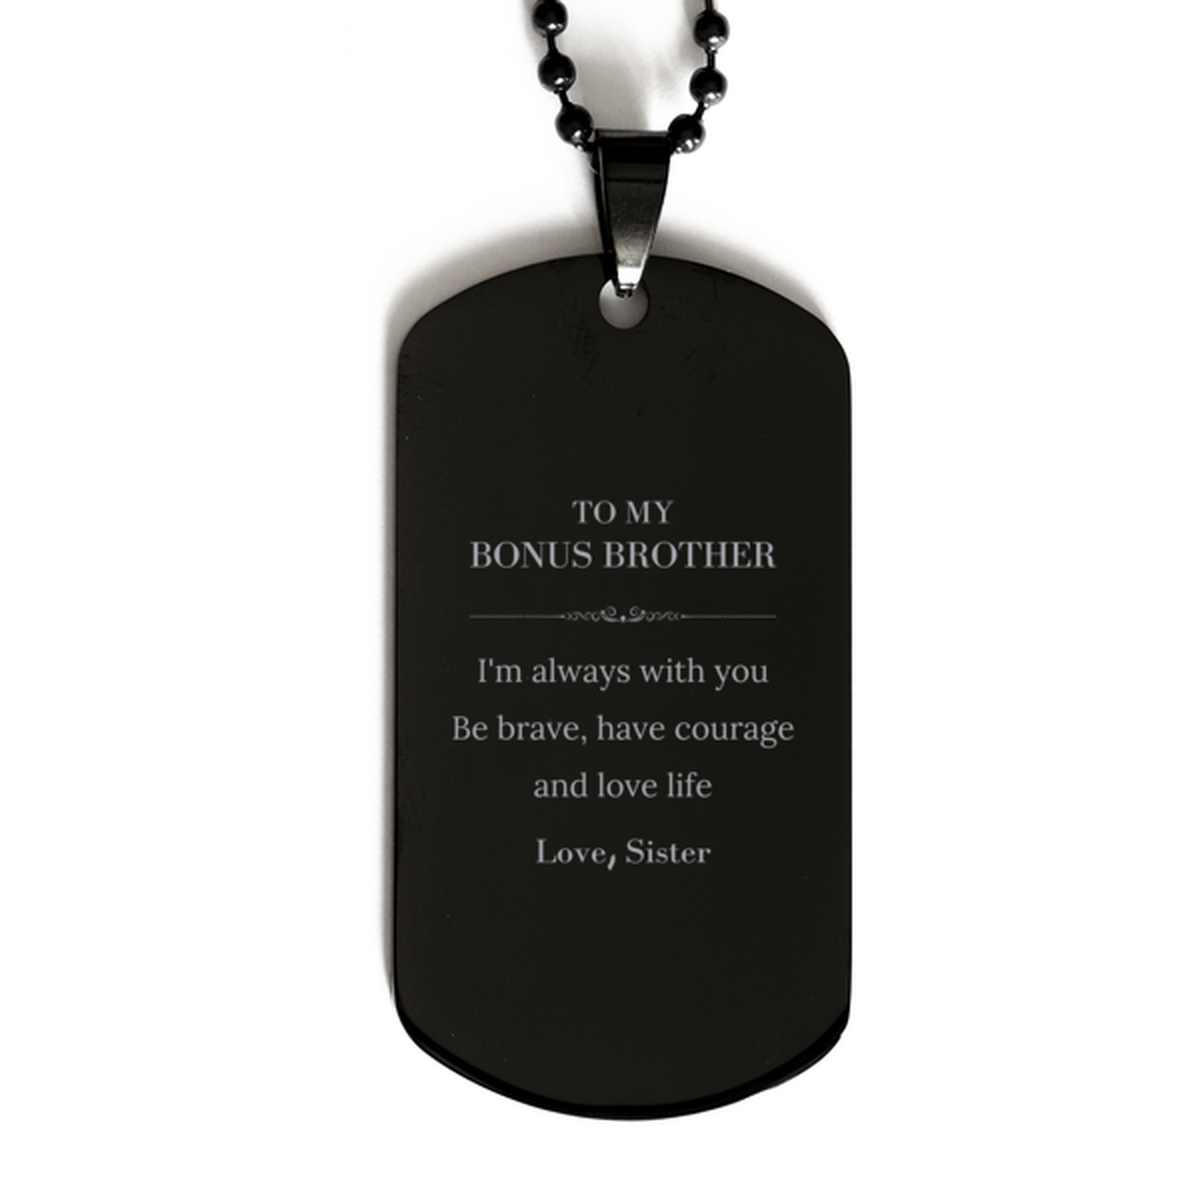 To My Bonus Brother Gifts from Sister, Unique Black Dog Tag Inspirational Christmas Birthday Graduation Gifts for Bonus Brother I'm always with you. Be brave, have courage and love life. Love, Sister